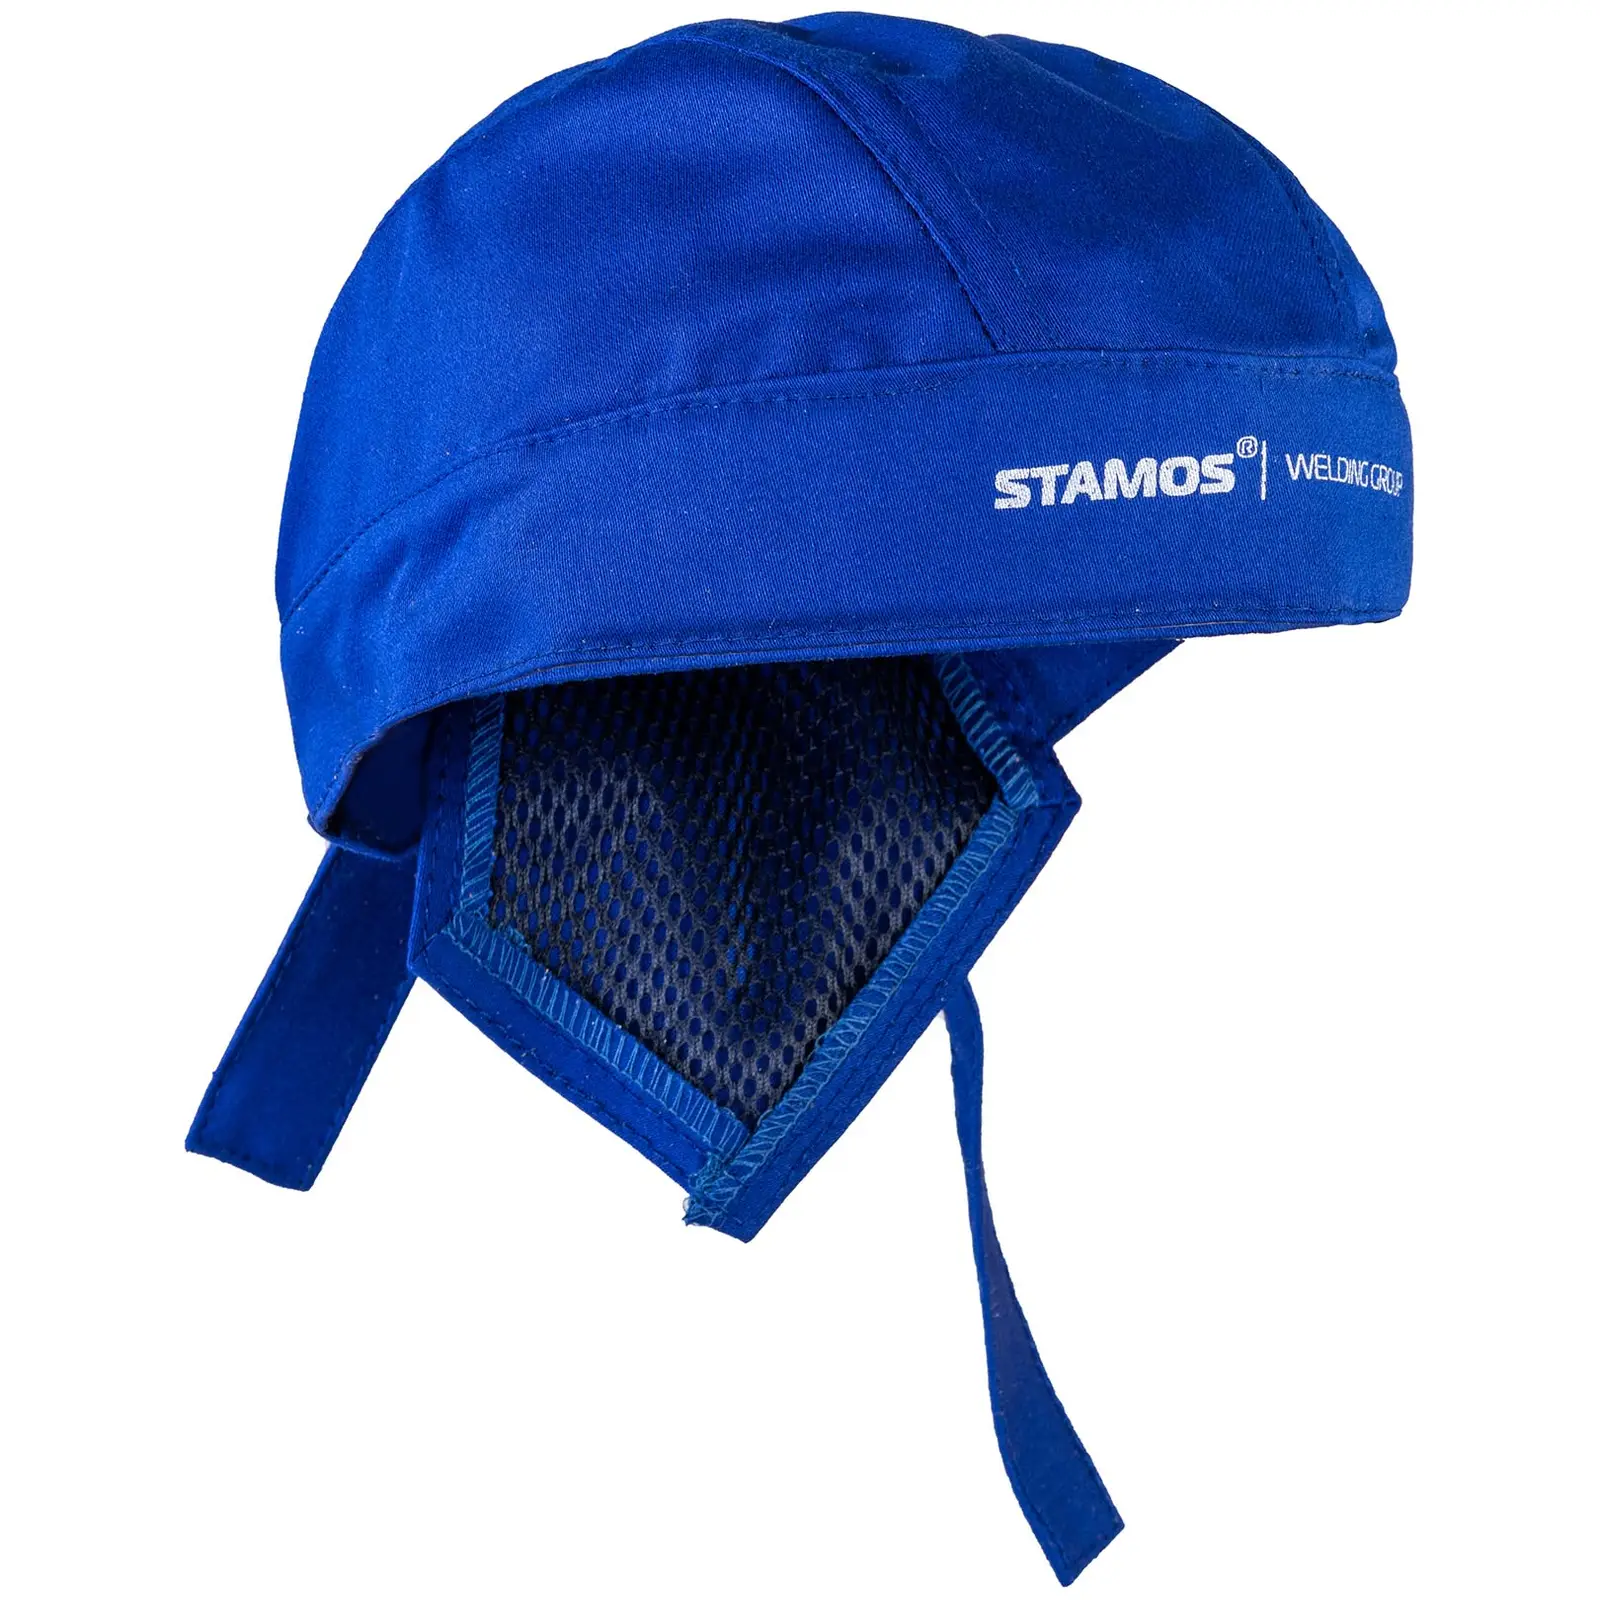 Welding Cap - 15 x 51/27 cm - variable circumference - Blue